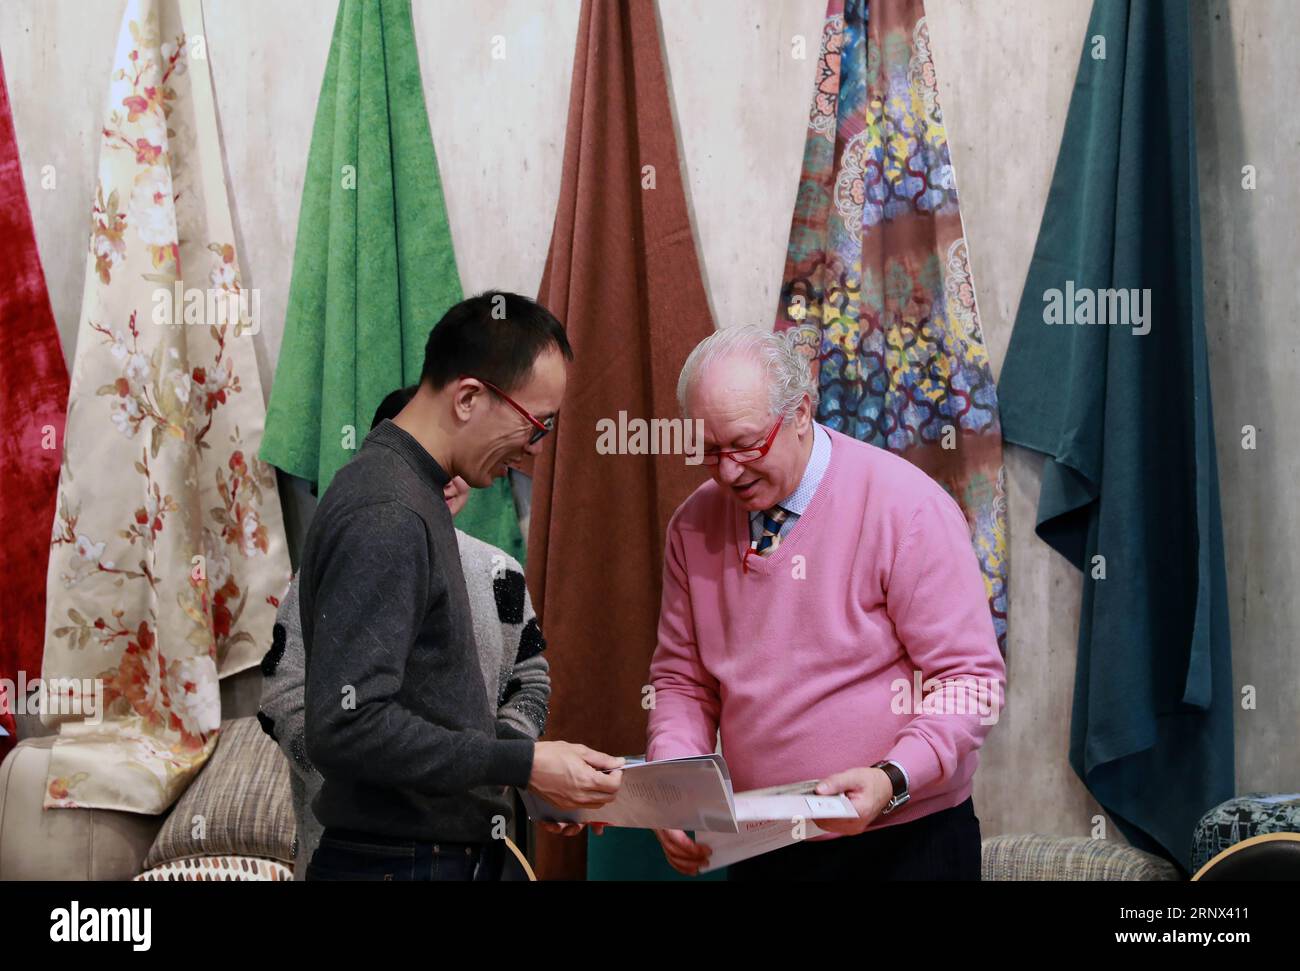 (180112) -- FRANKFURT, Jan. 12, 2018 -- Chinese exhibitors talk with a visitor at a Chinese textile booth at Heimtextil, the world s largest international trade fair for home and contract textiles, in Frankfurt, Germany, on Jan. 11, 2018. A total of 2,975 exhibitors from 64 countries and regions attended the trade fair this year, 545 of which are from China. ) (djj) GERMANY-FRANKFURT-HEIMTEXTIL-CHINA LuoxHuanhuan PUBLICATIONxNOTxINxCHN Stock Photo